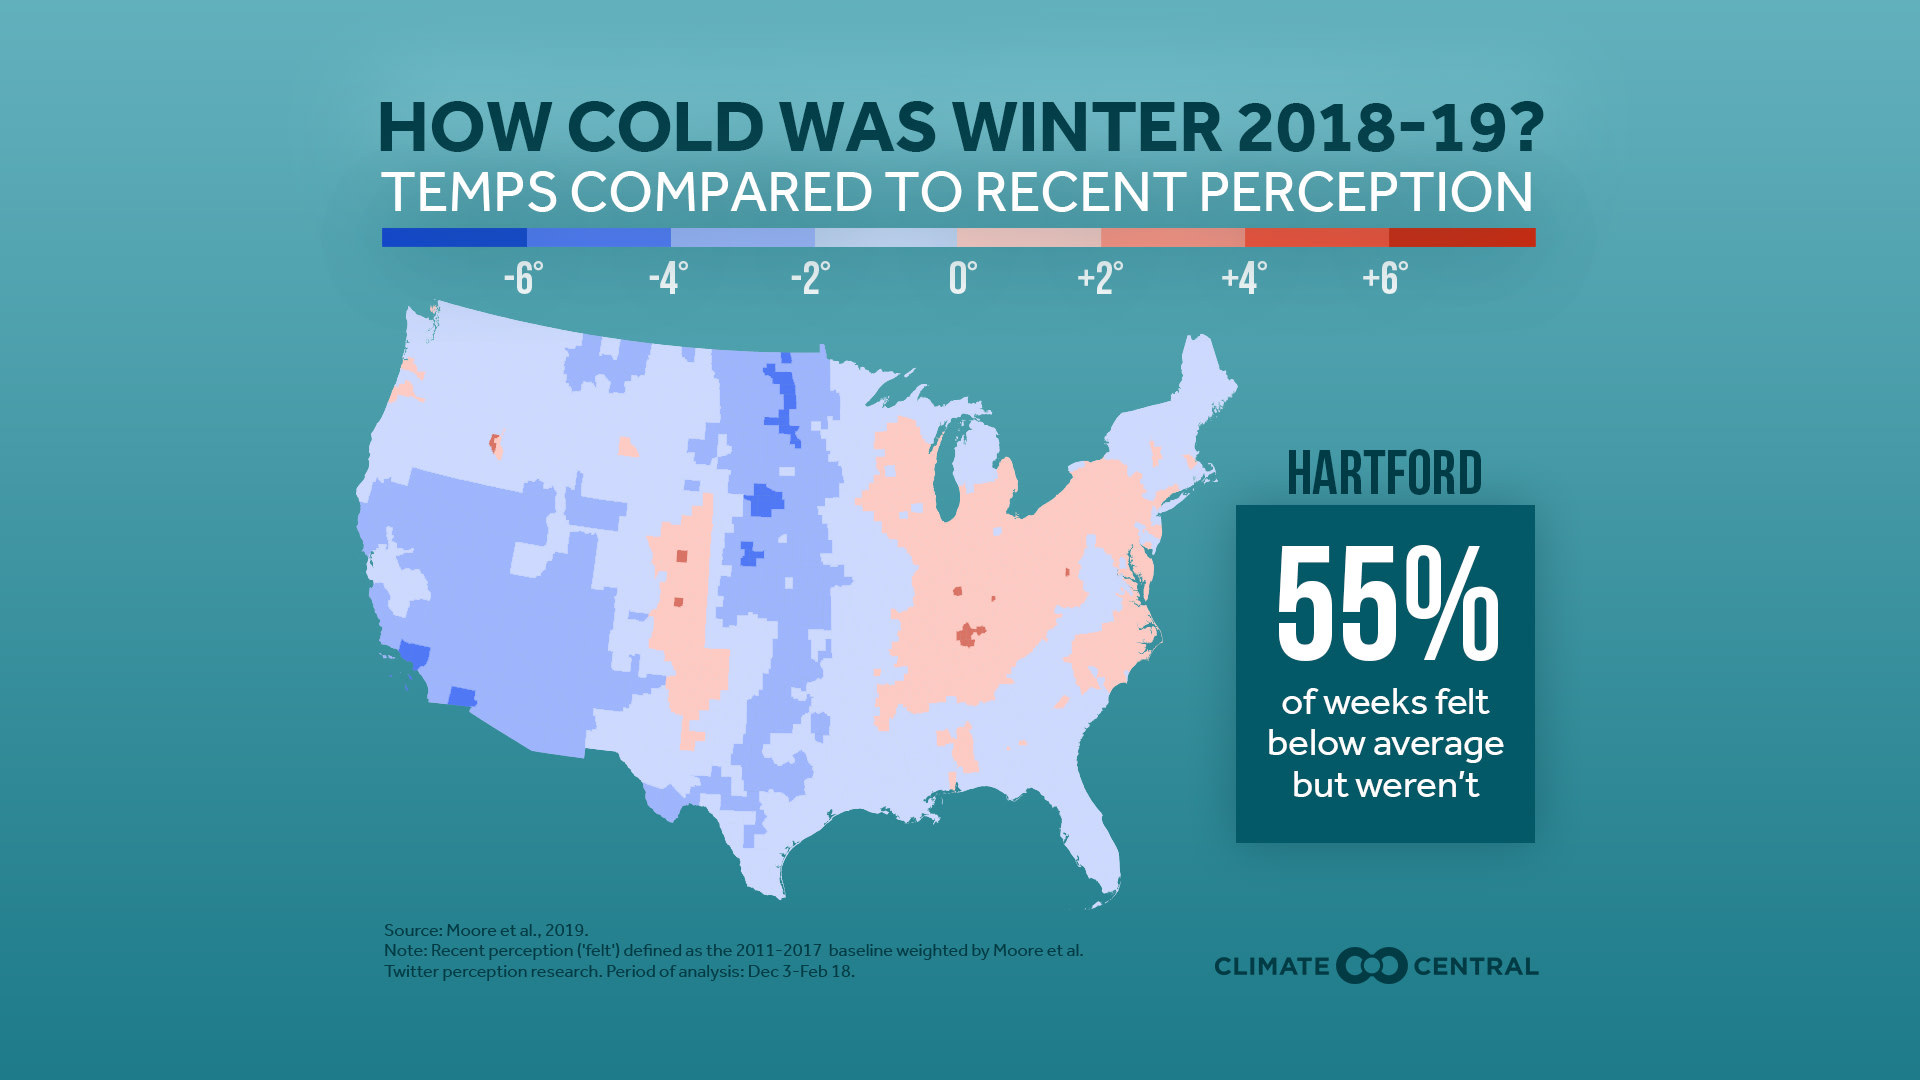 How Was This Winter’s Cold Perceived?